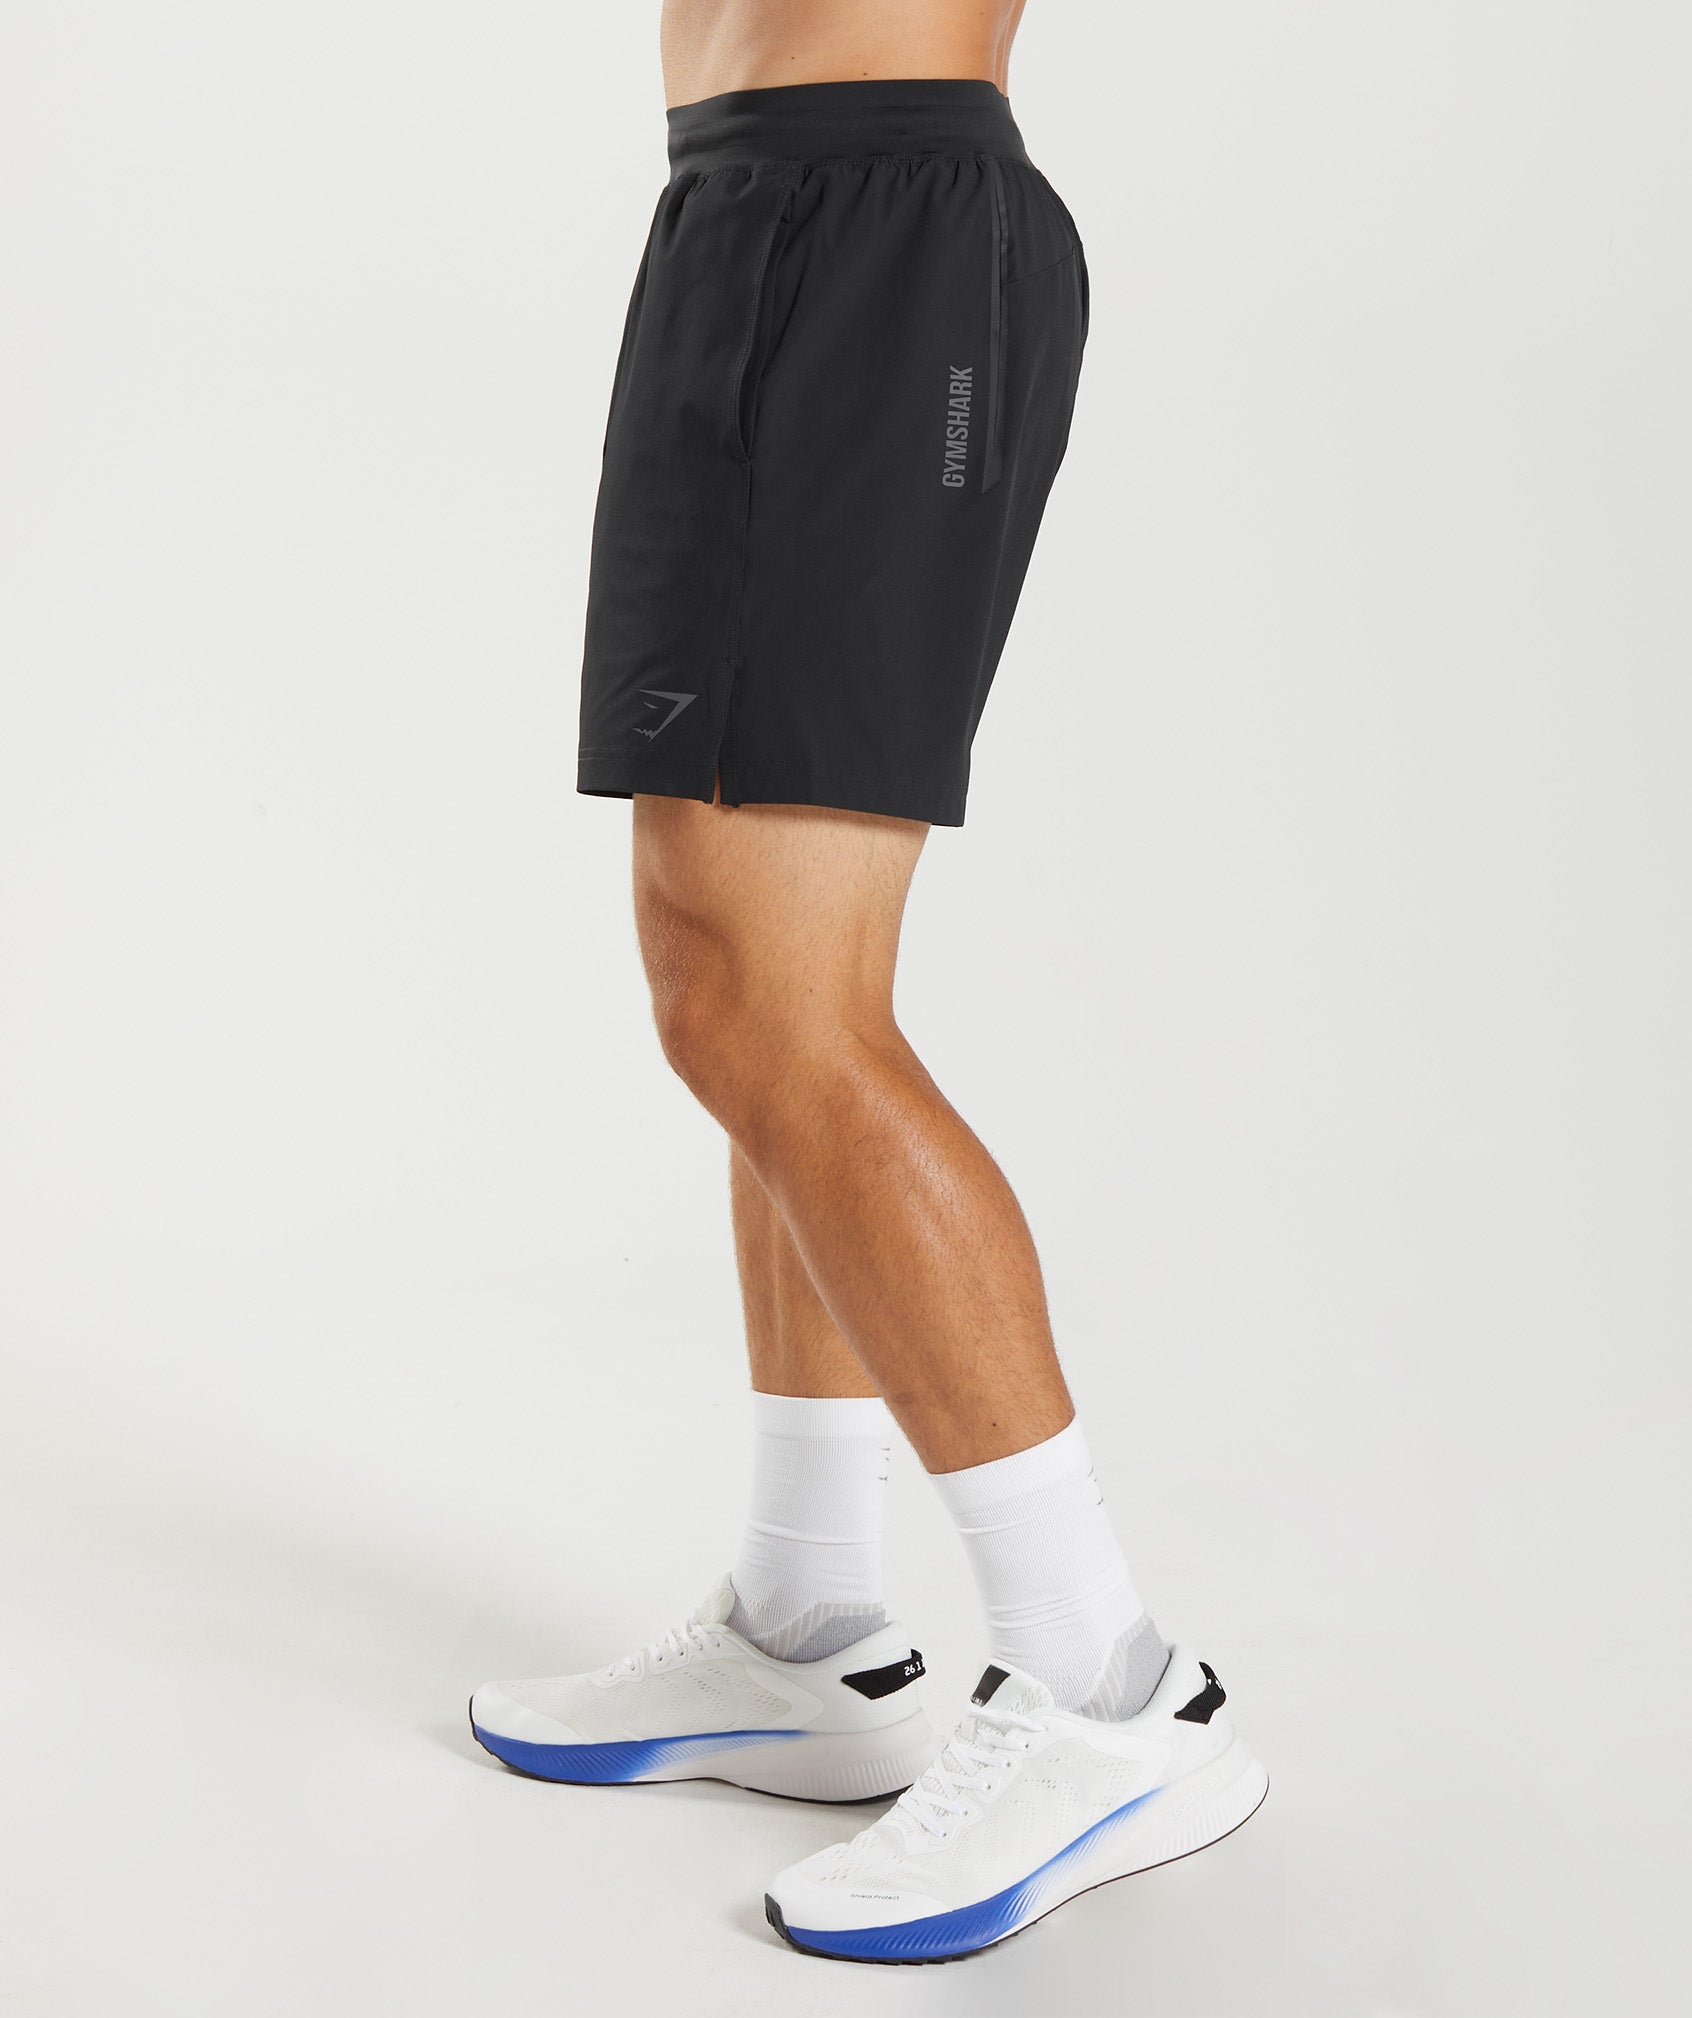 Apex 8" Function Shorts in Black - view 3